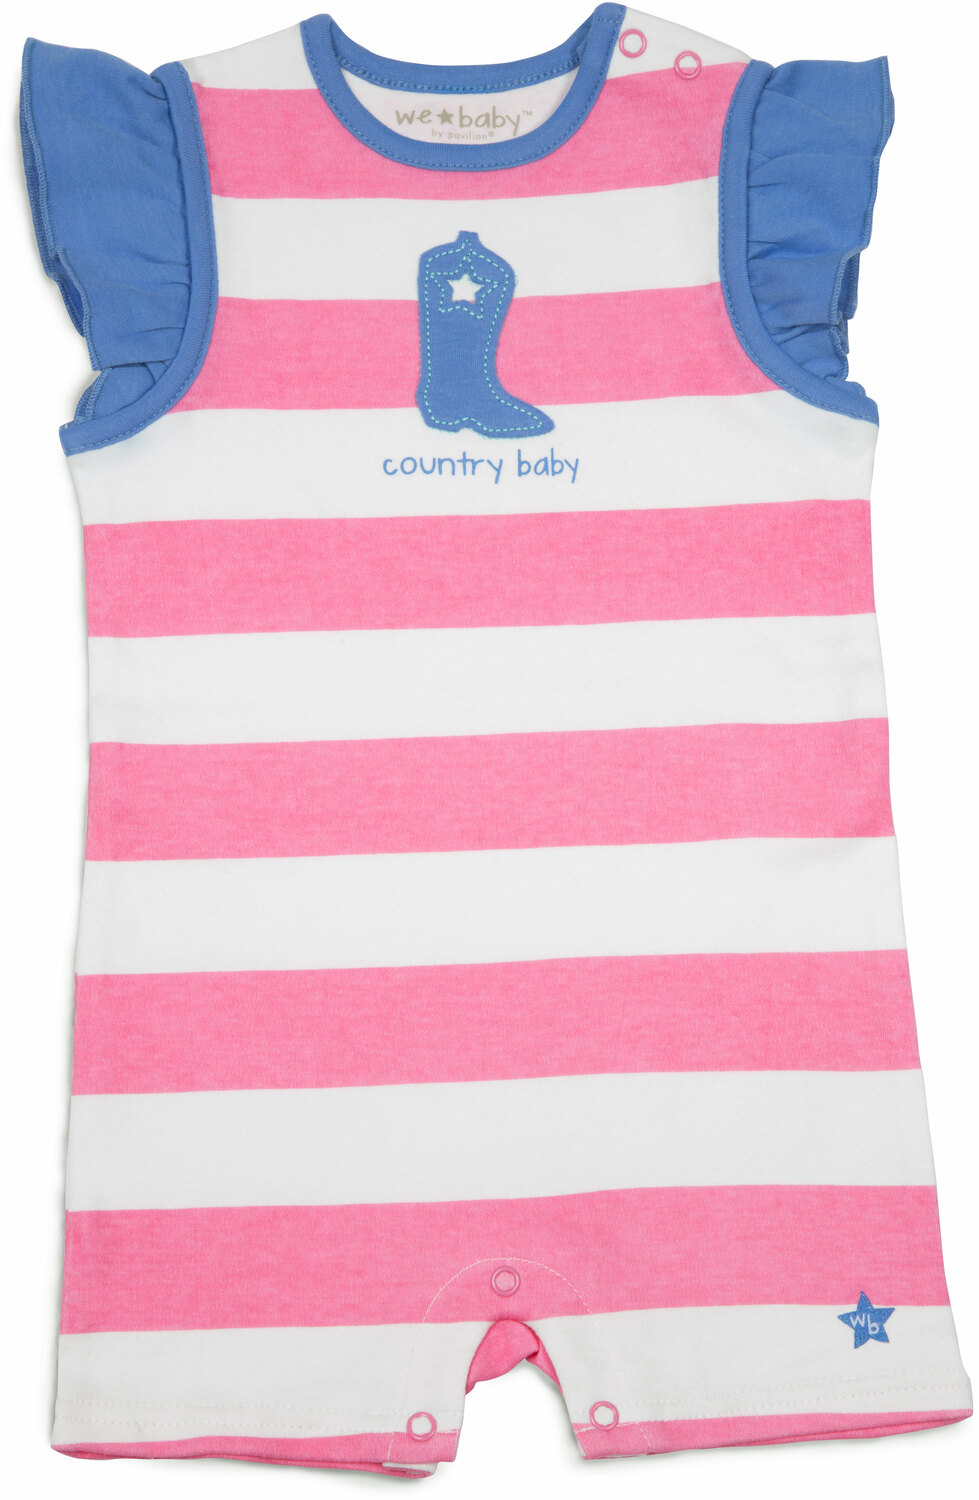 Country Baby by We Baby - Country Baby - 12-24 Month Girl Romper